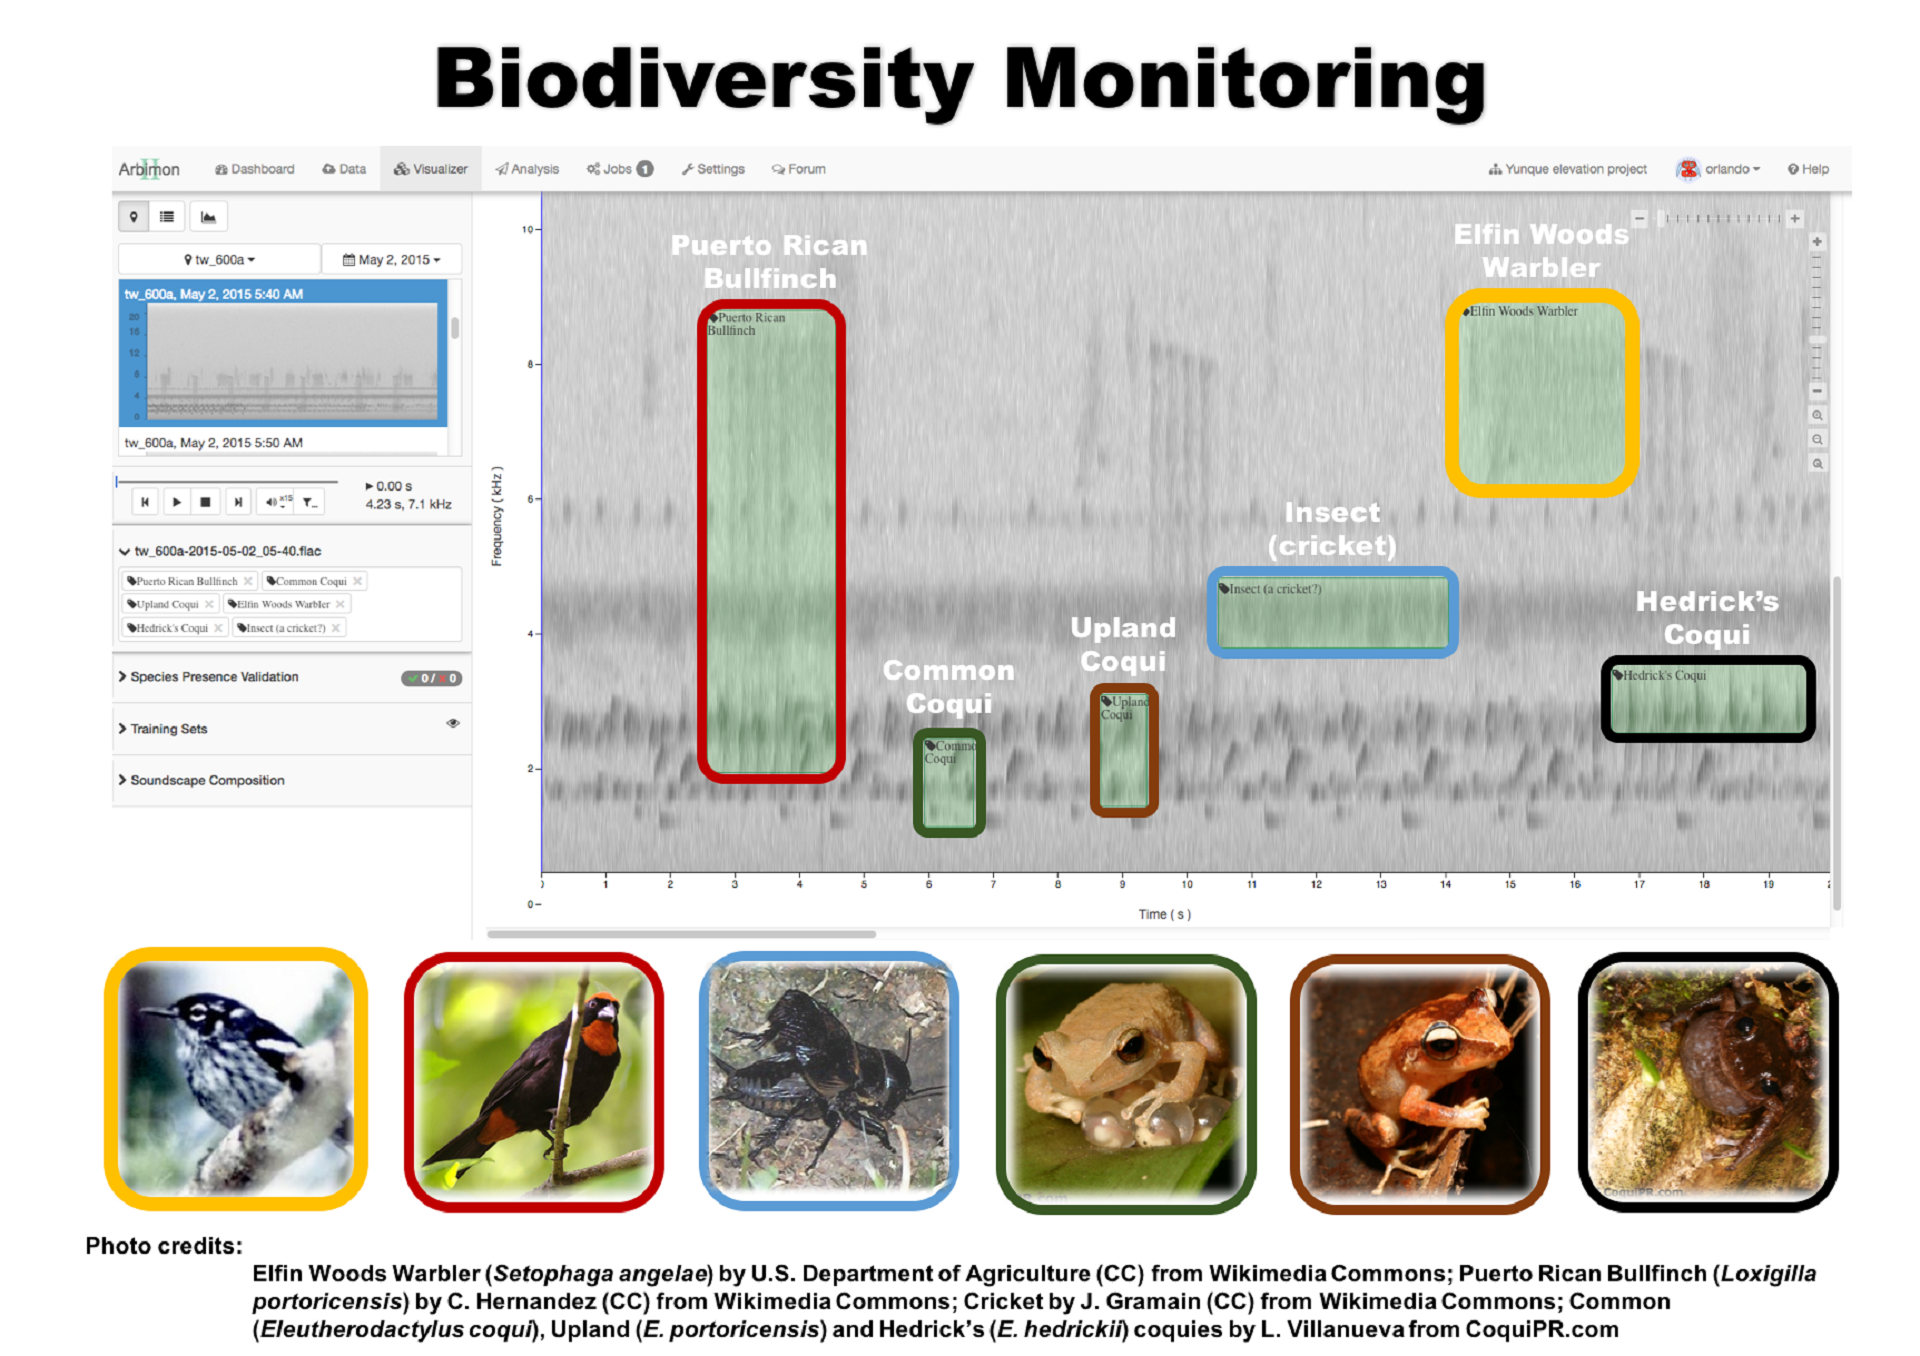 The acoustic diversity of an ecosystem can give an idea of its biodiversity.